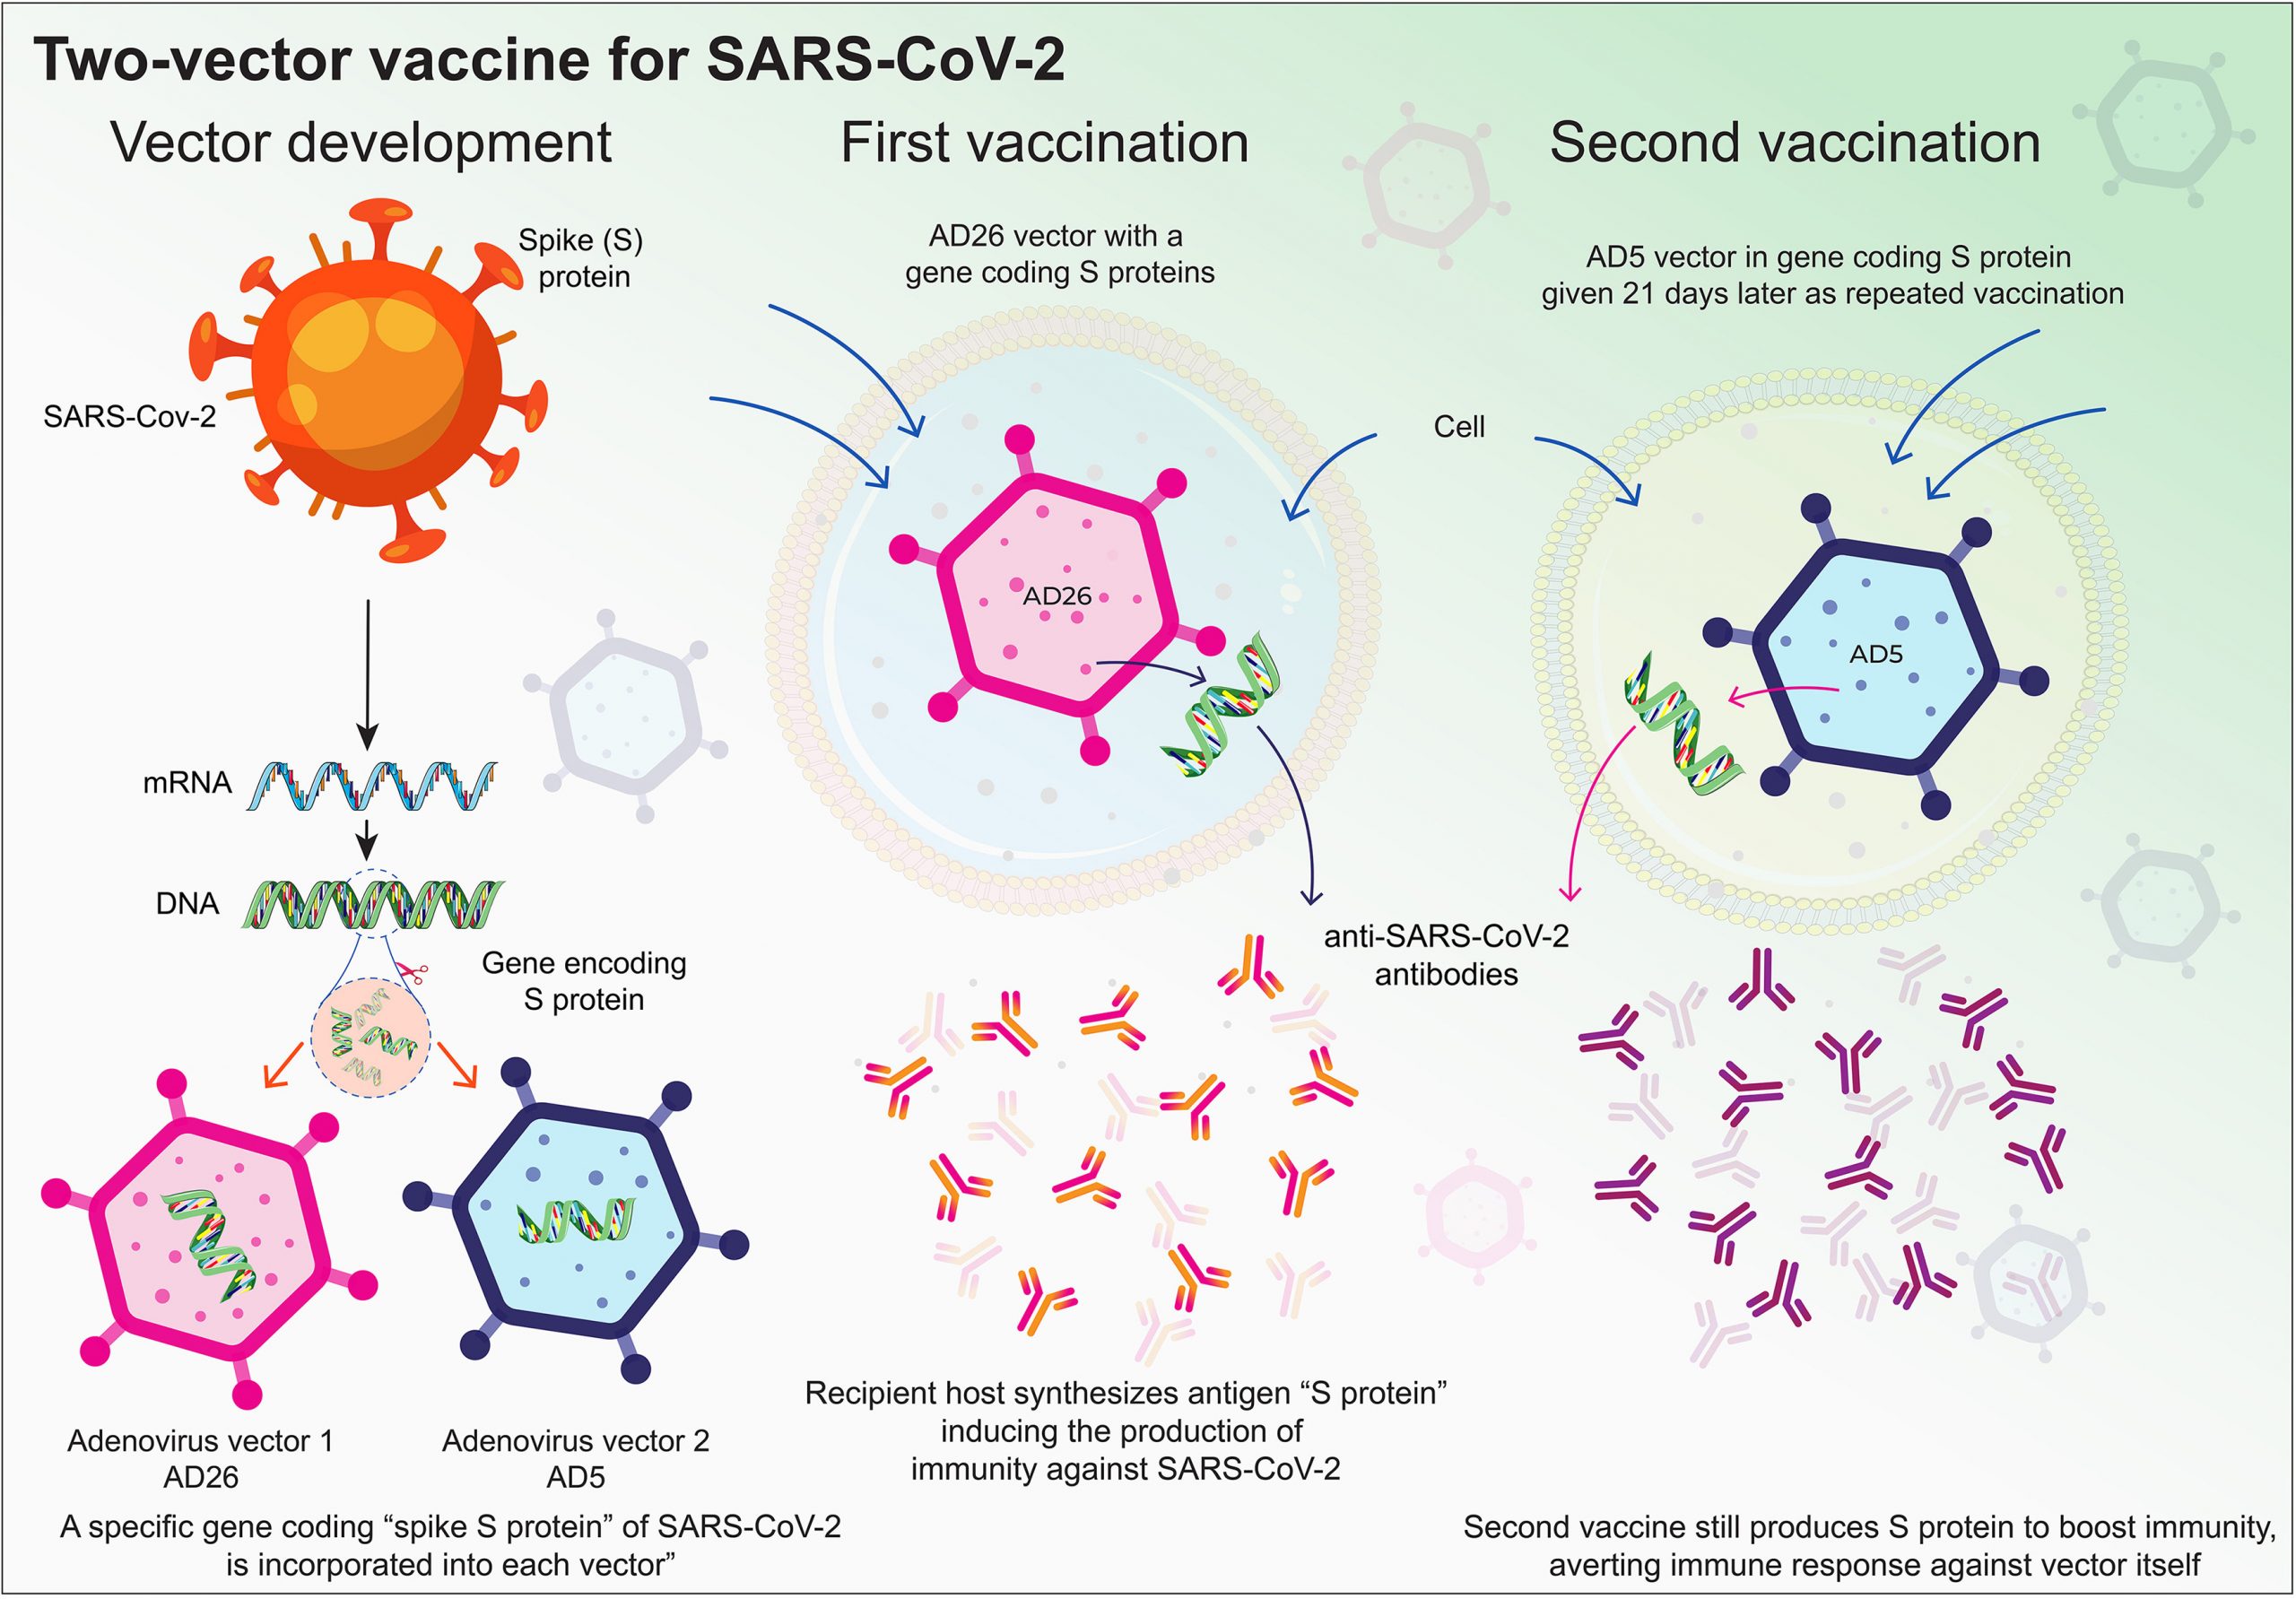 Nanocarrier Vaccines for SARS-CoV-2